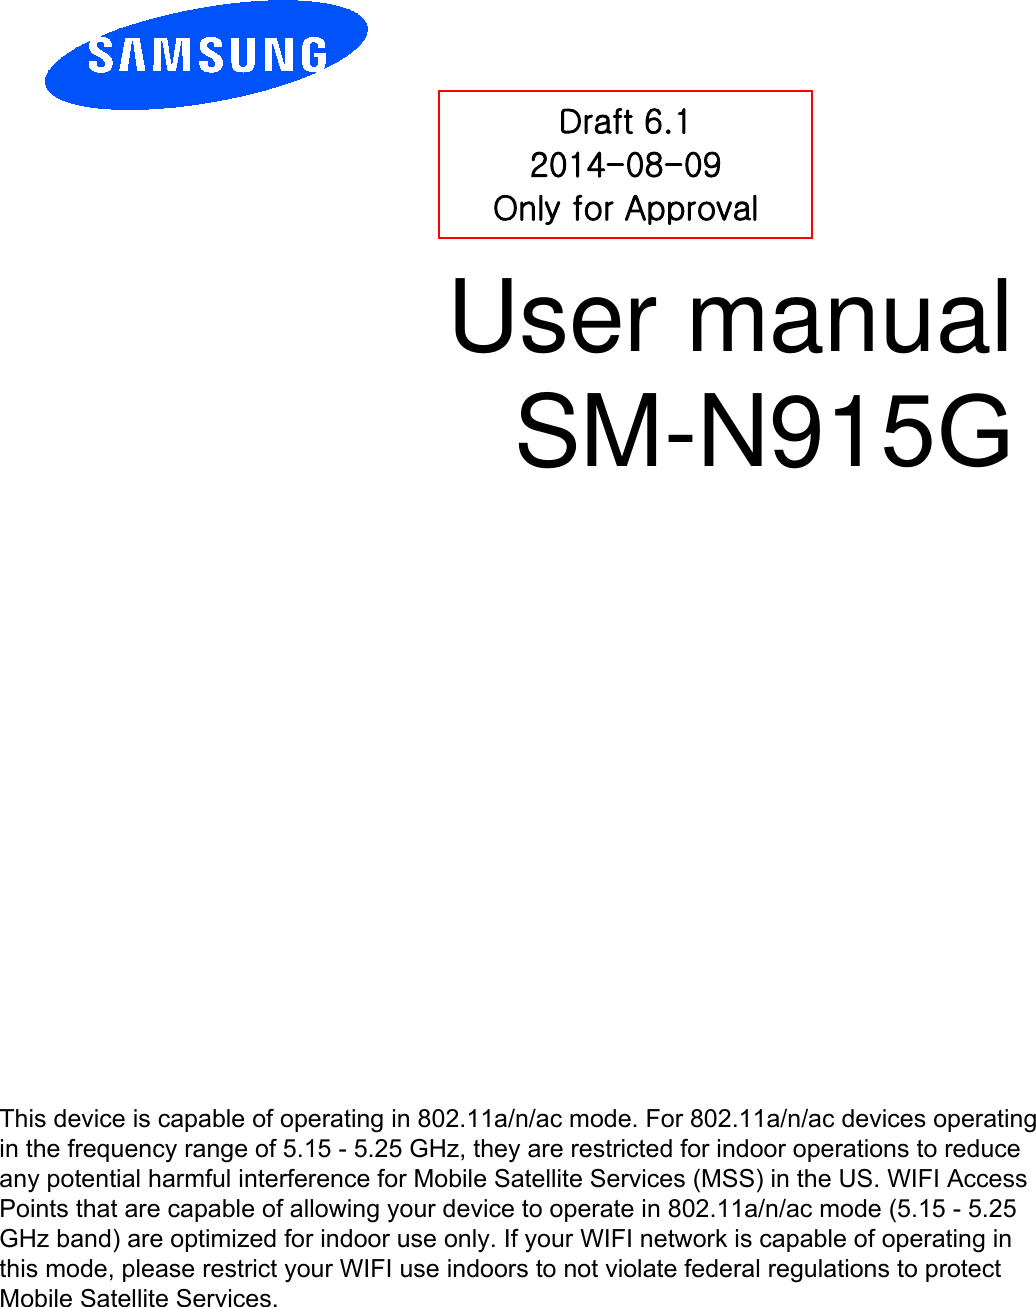 User manual SM-N915G Draft 6.1 2014-08-09 Only for Approval This device is capable of operating in 802.11a/n/ac mode. For 802.11a/n/ac devices operating in the frequency range of 5.15 - 5.25 GHz, they are restricted for indoor operations to reduce any potential harmful interference for Mobile Satellite Services (MSS) in the US. WIFI Access Points that are capable of allowing your device to operate in 802.11a/n/ac mode (5.15 - 5.25 GHz band) are optimized for indoor use only. If your WIFI network is capable of operating in this mode, please restrict your WIFI use indoors to not violate federal regulations to protect Mobile Satellite Services. 